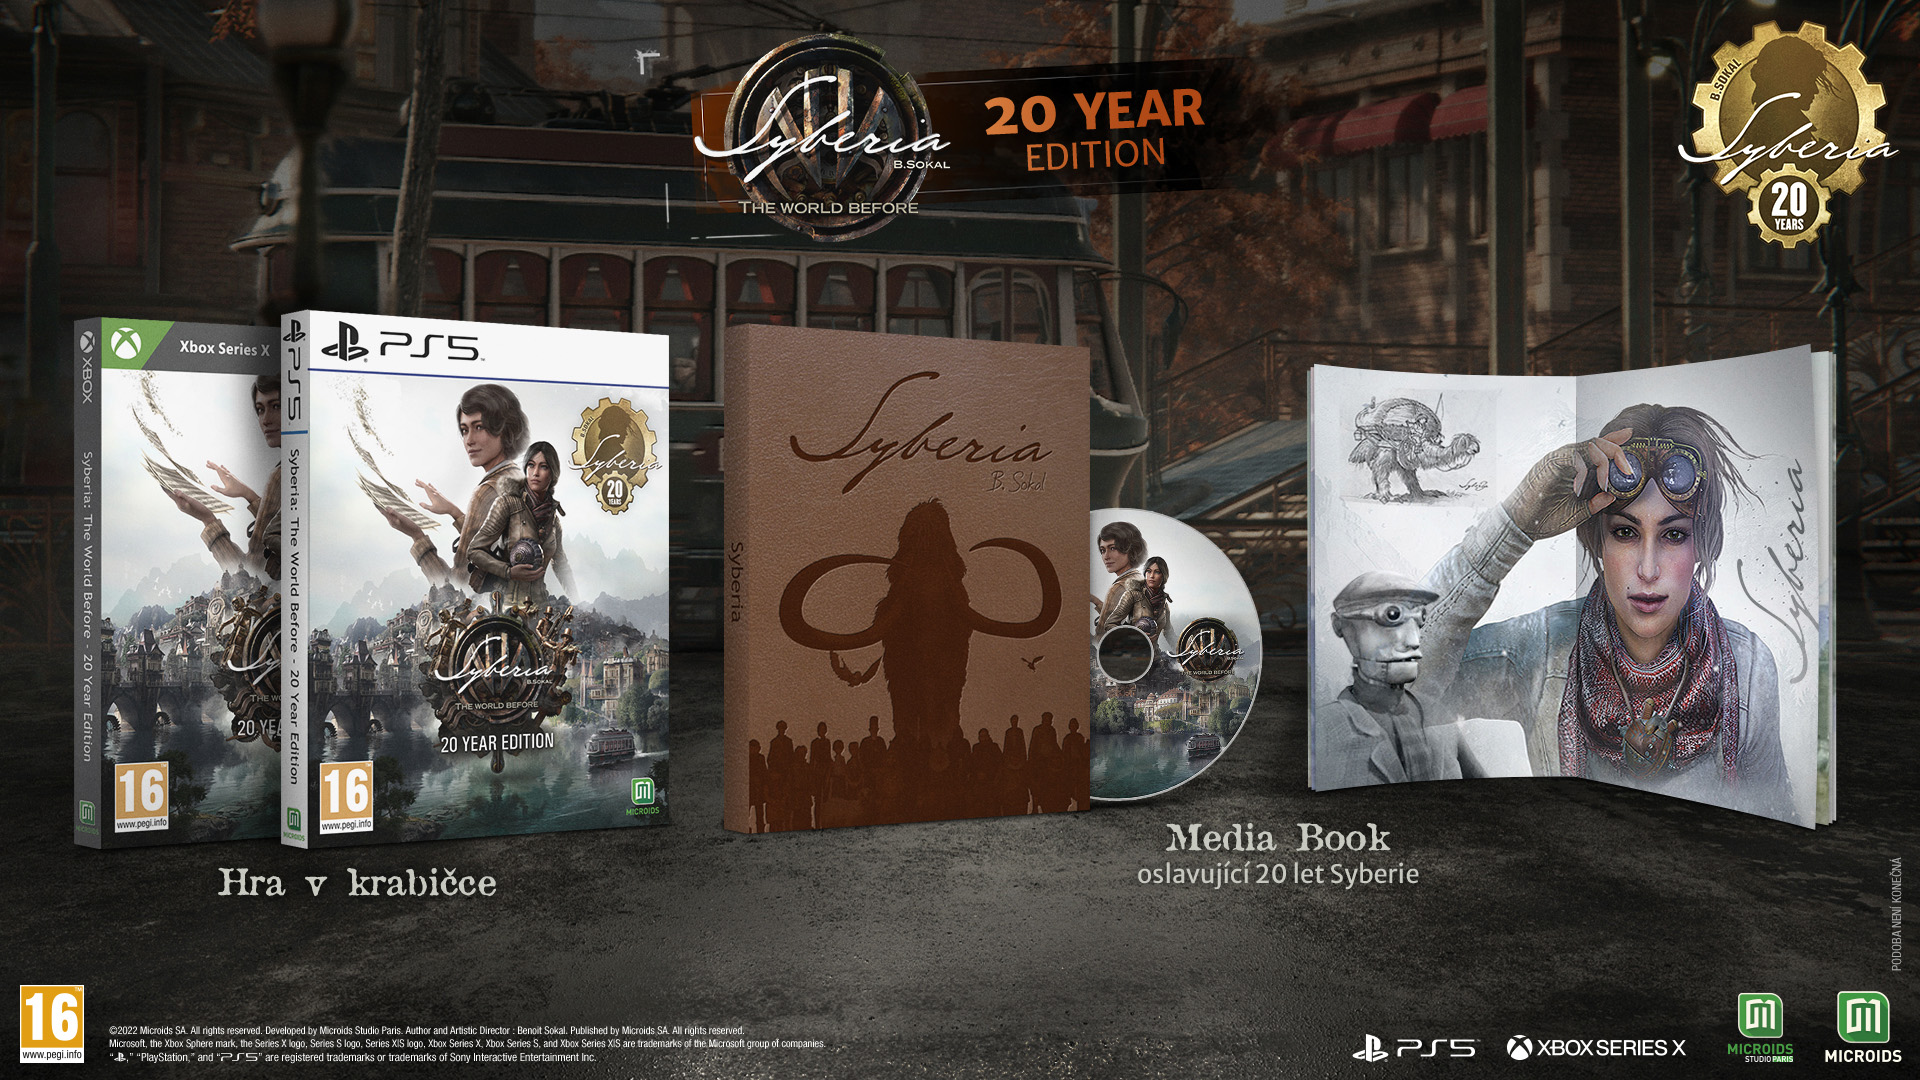 syberia-the-world-before-le-cz-both.jpg